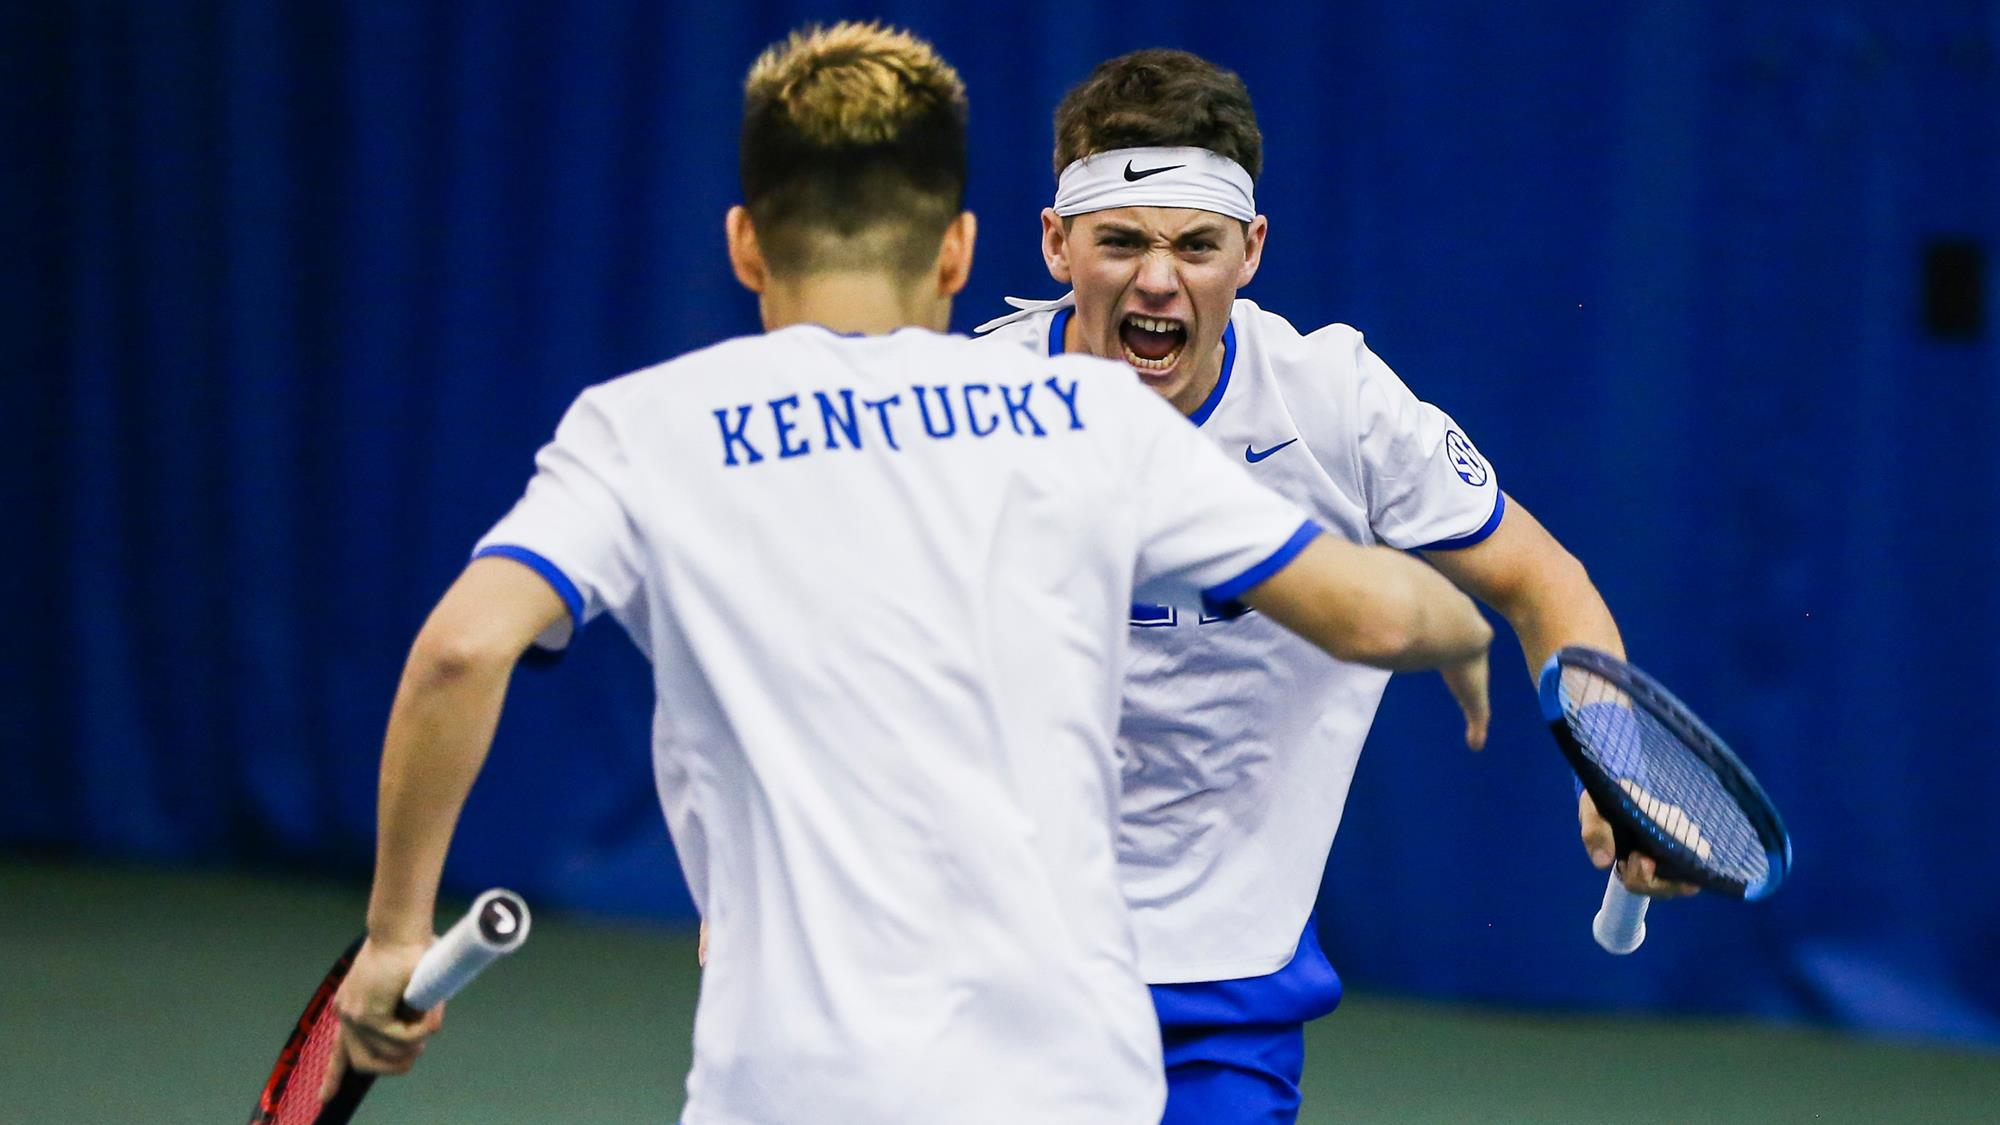 Kentucky Beats Memphis, Kennesaw State in Home Doubleheader